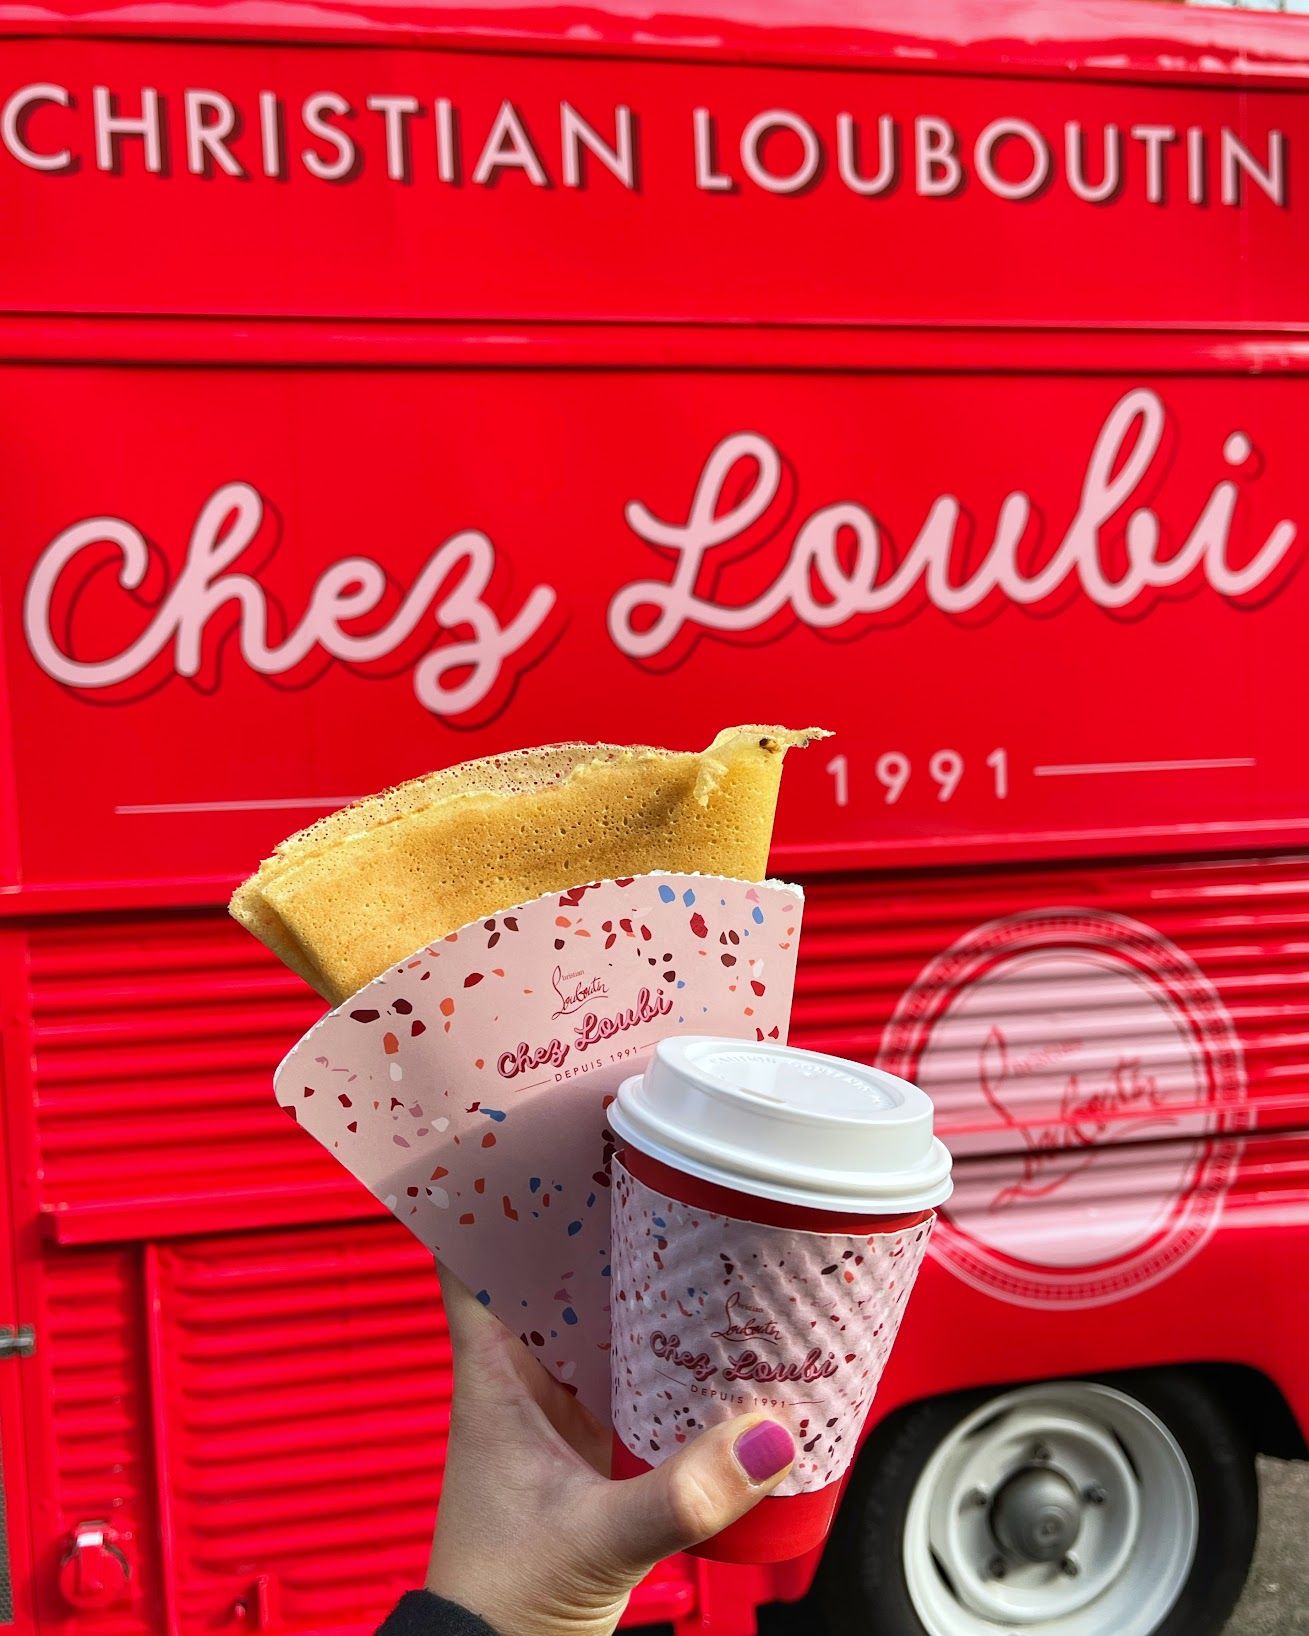 Crepes and coffee courtesy of Christian Louboutin